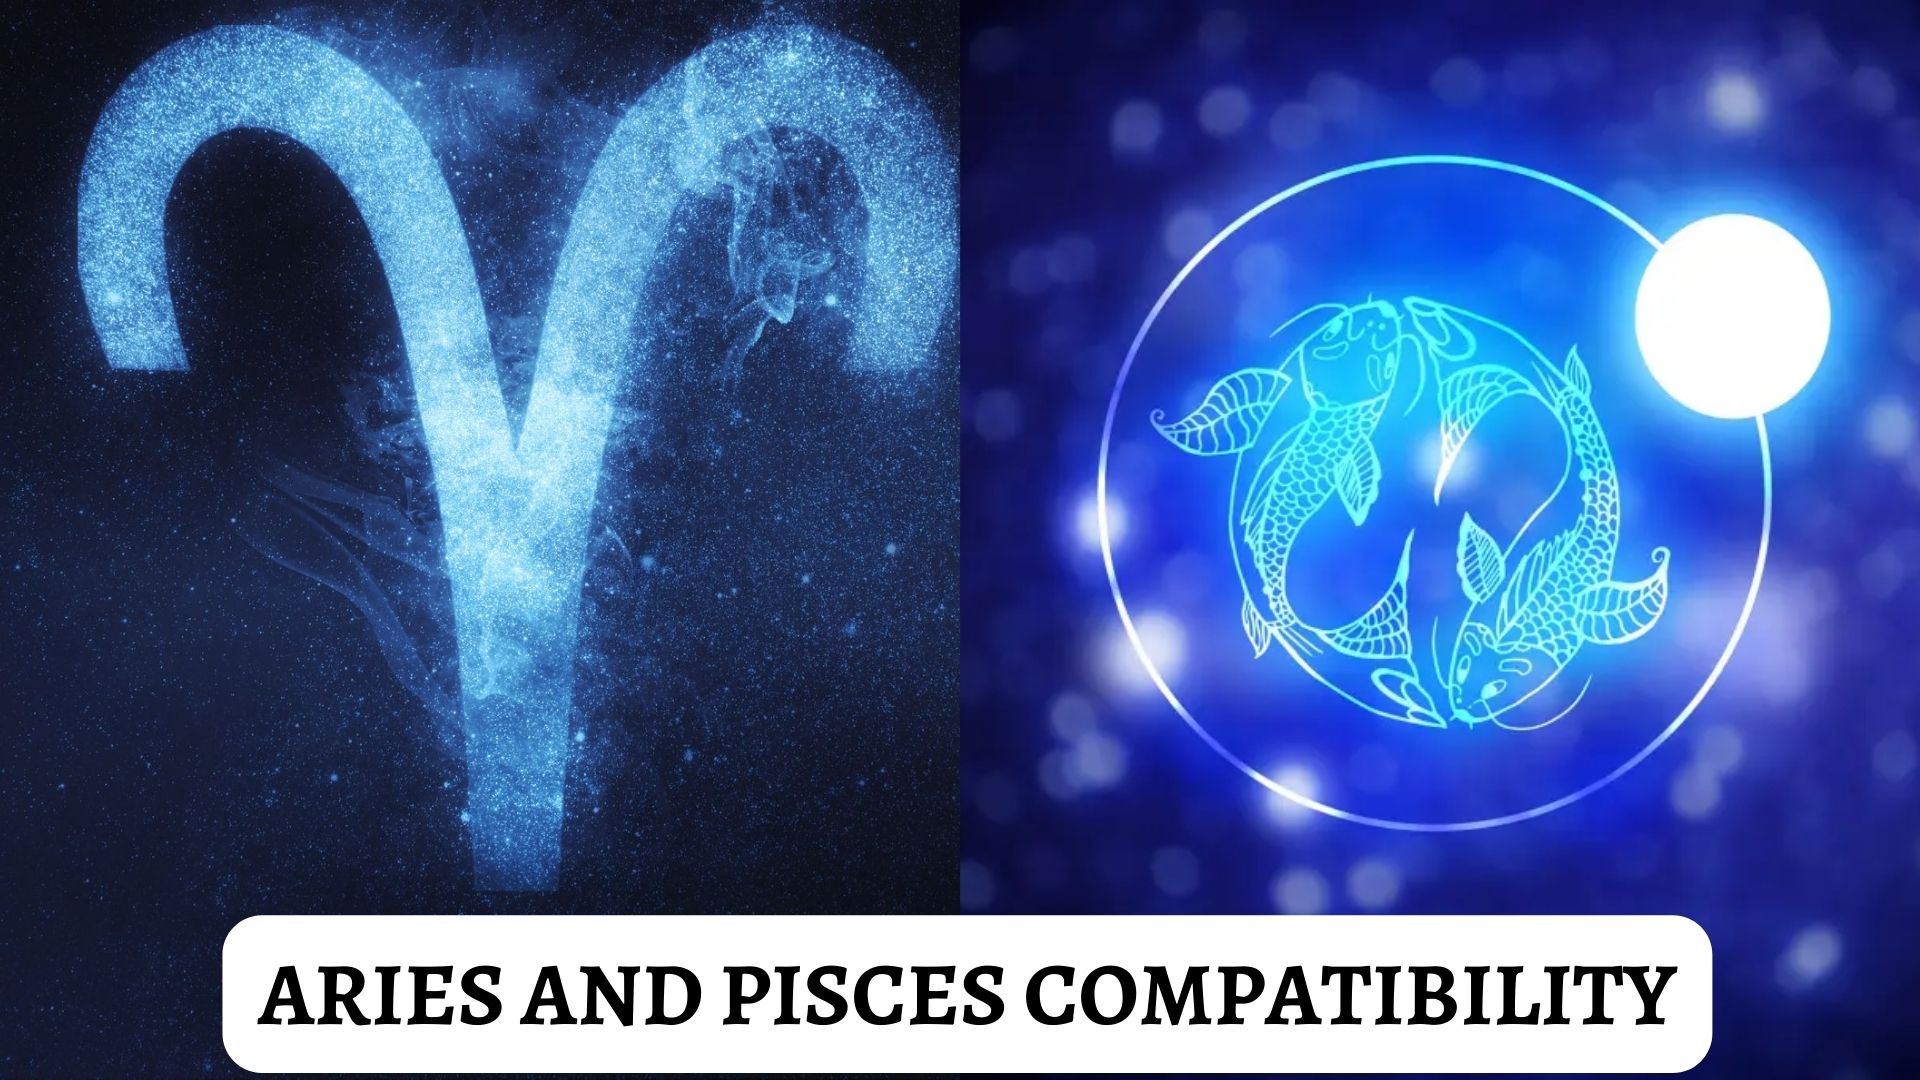 Aries And Pisces Compatibility - Very Compatible In Friendship